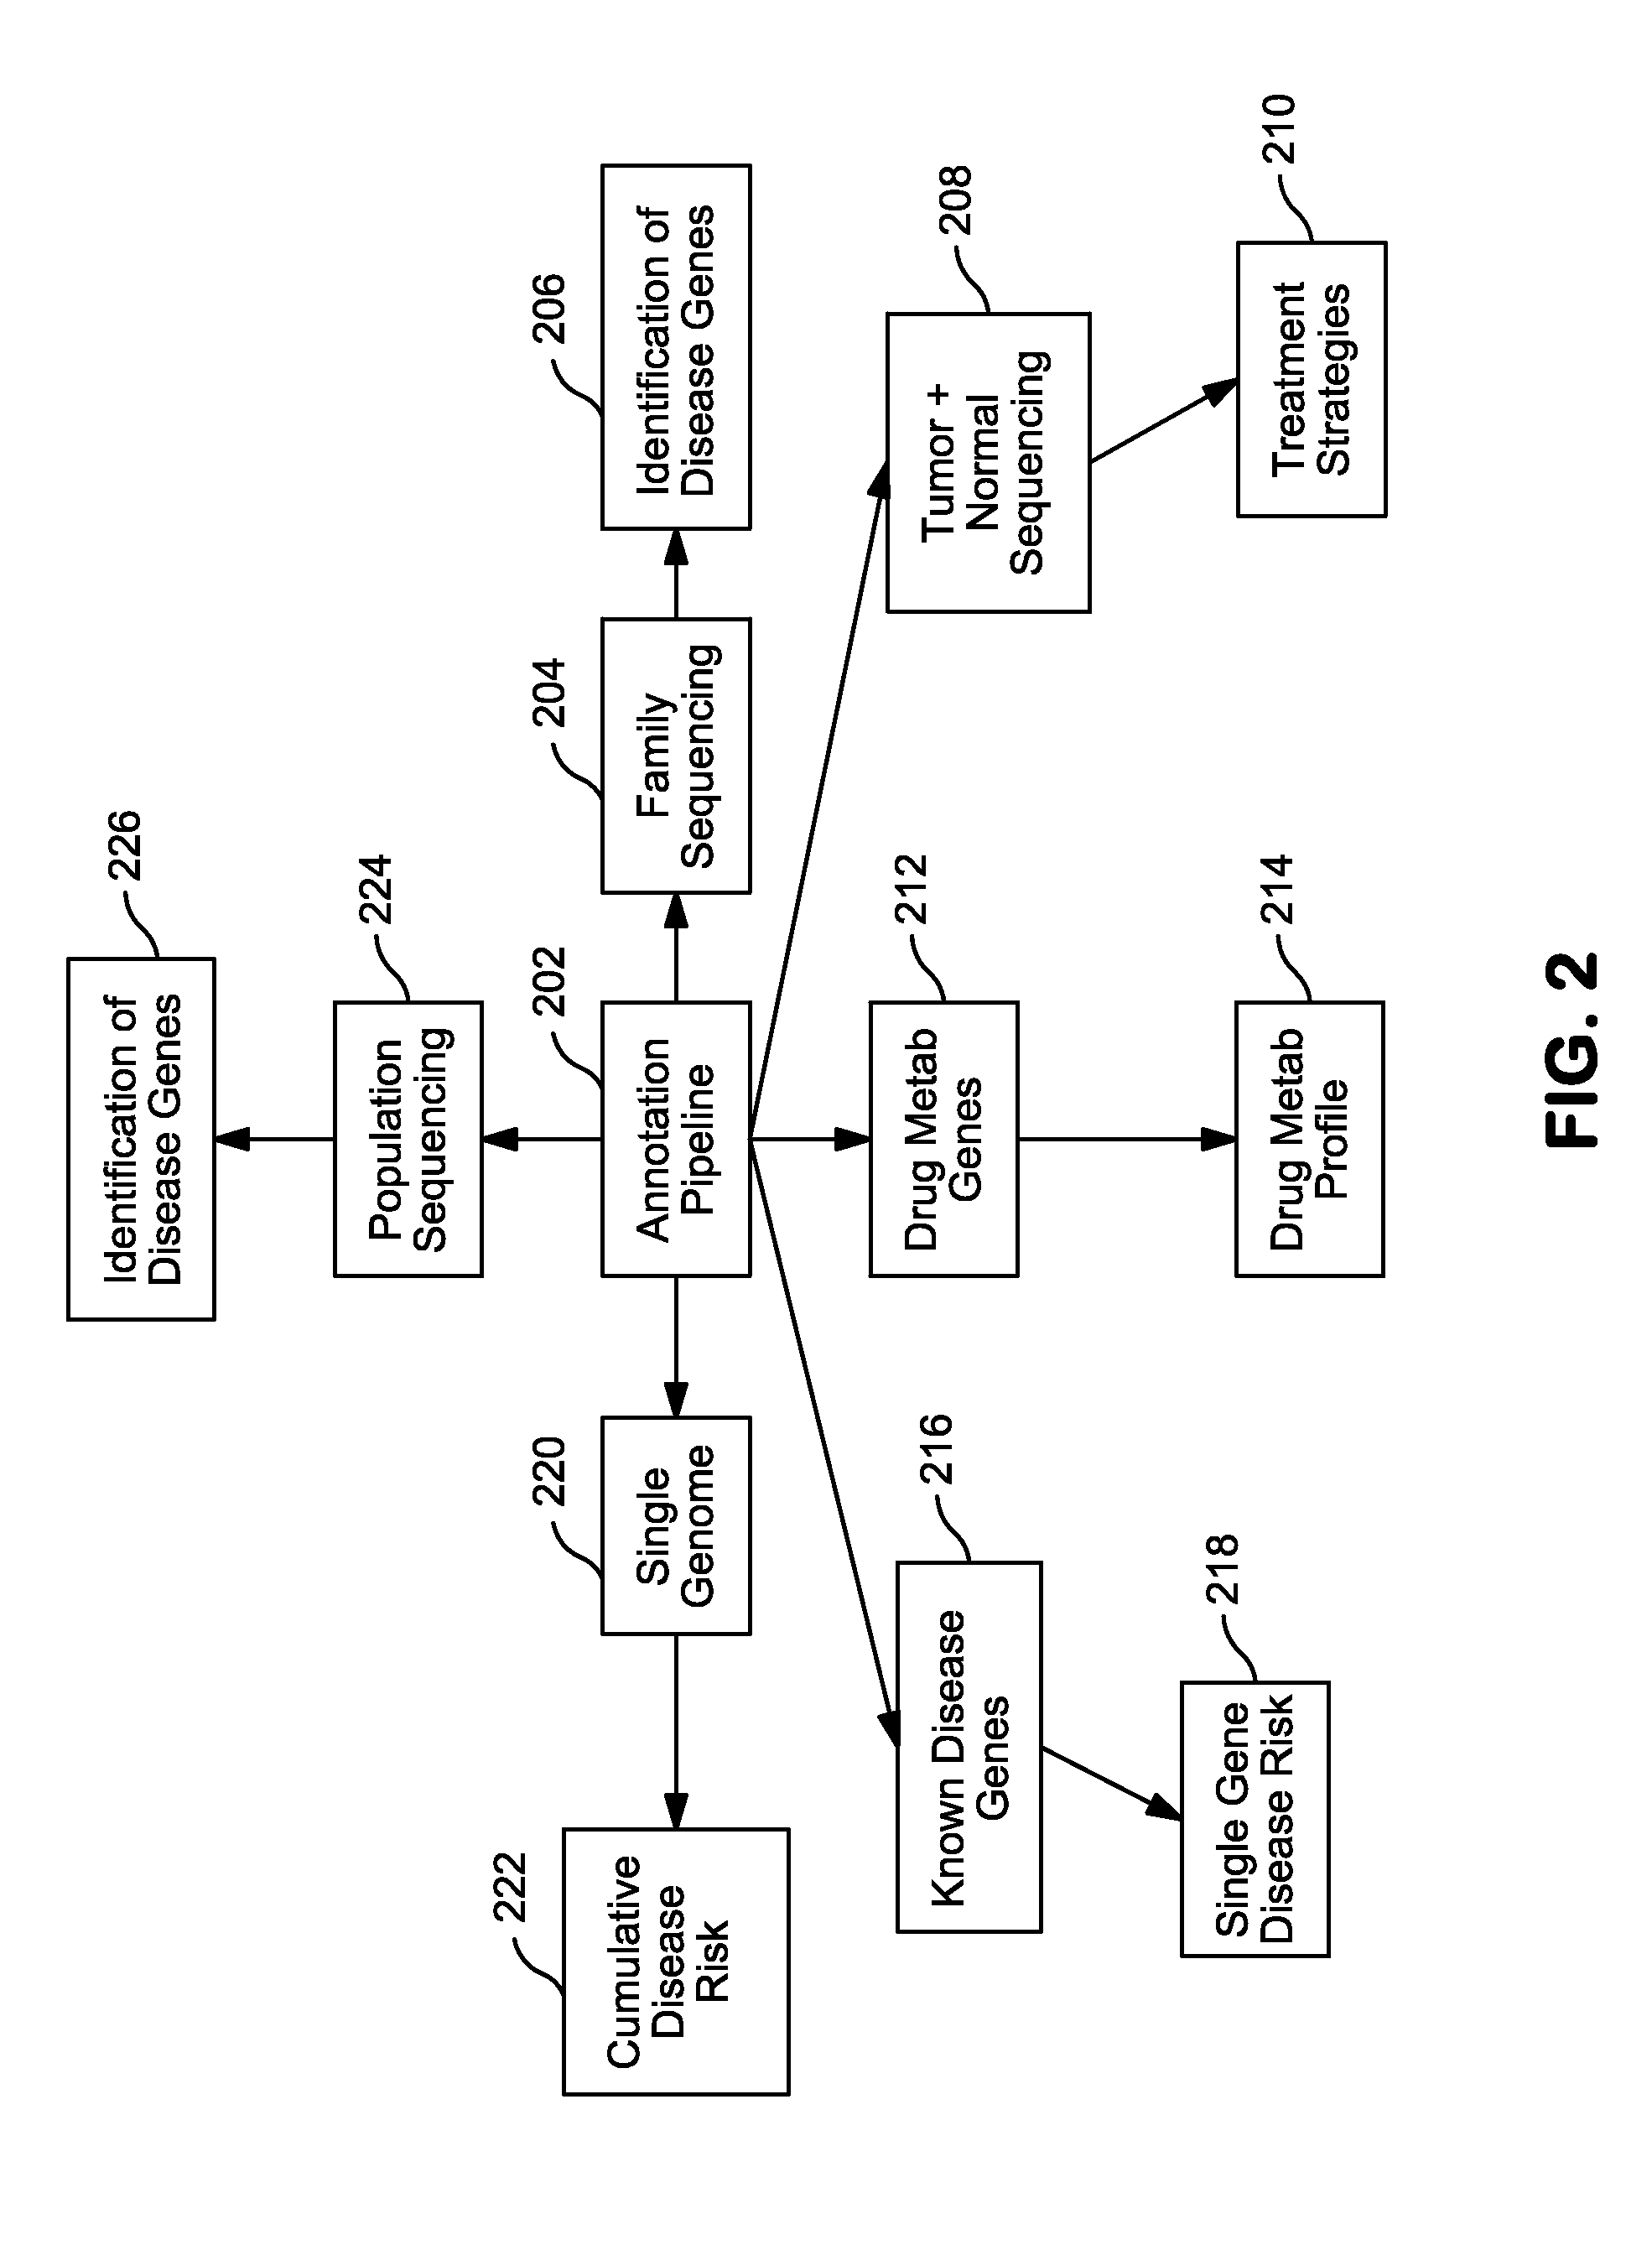 Systems and Methods for Genomic Annotation and Distributed Variant Interpretation